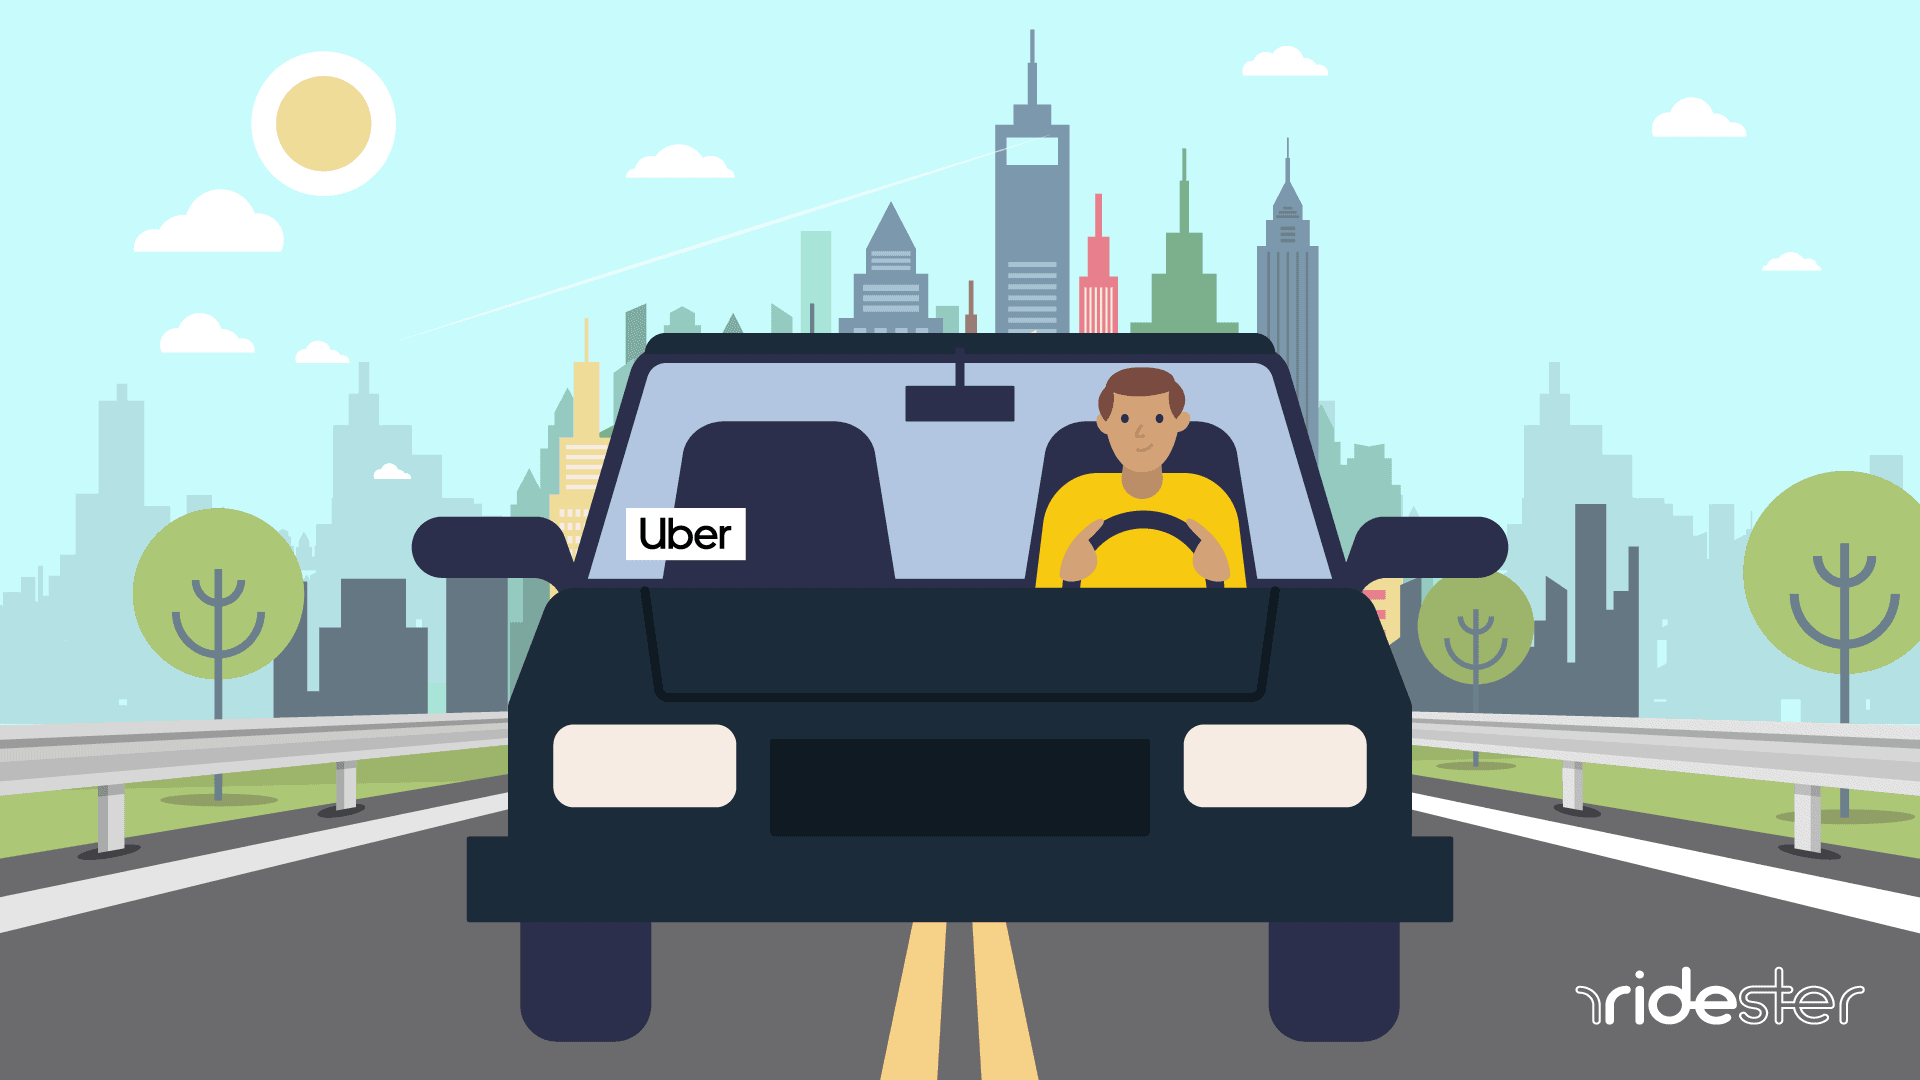 Uber Sticker How To Get One Where To Place It Ridester